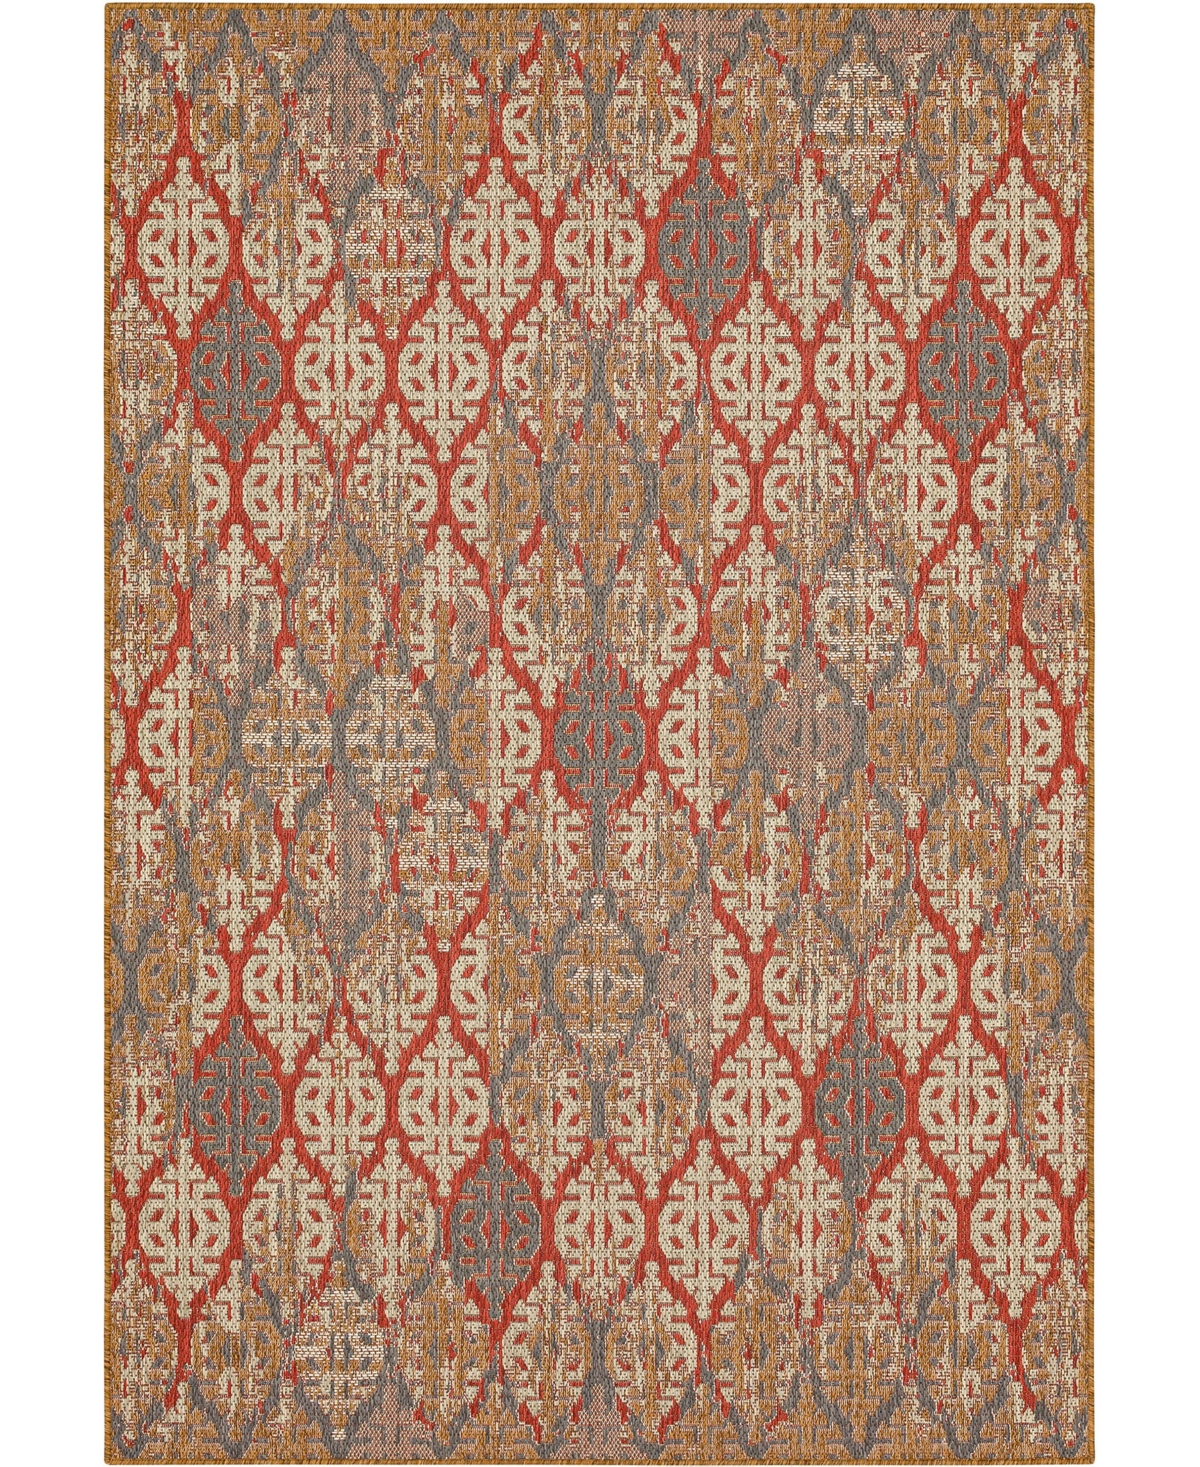 Mohawk Malibu Outdoor Stamped Ikat 8' X 10' Area Rug In Red